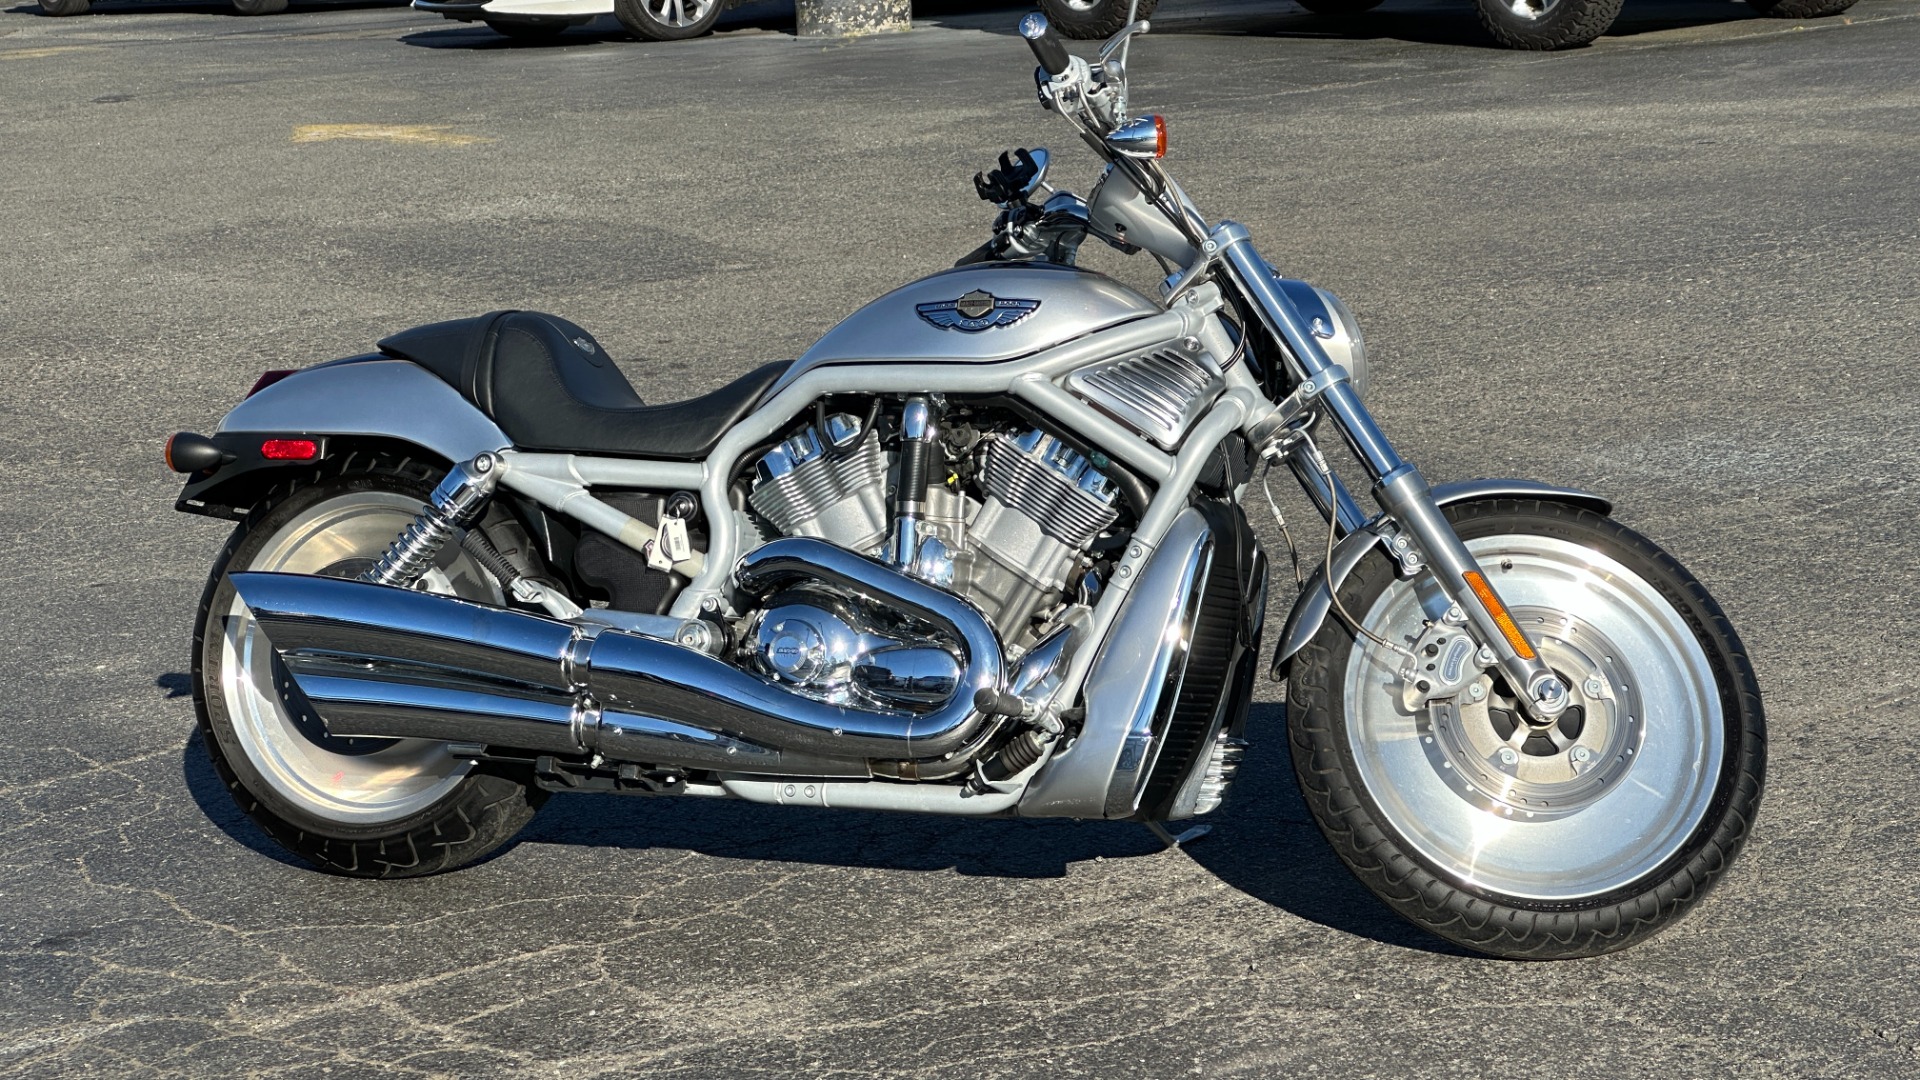 Used 2003 Harley Davidson V Rod ANNIVERSARY EDITION / 1130CC ENGINE / BREMBO BRAKES / VORTEX AIR SCOOPS for sale $7,995 at Formula Imports in Charlotte NC 28227 61